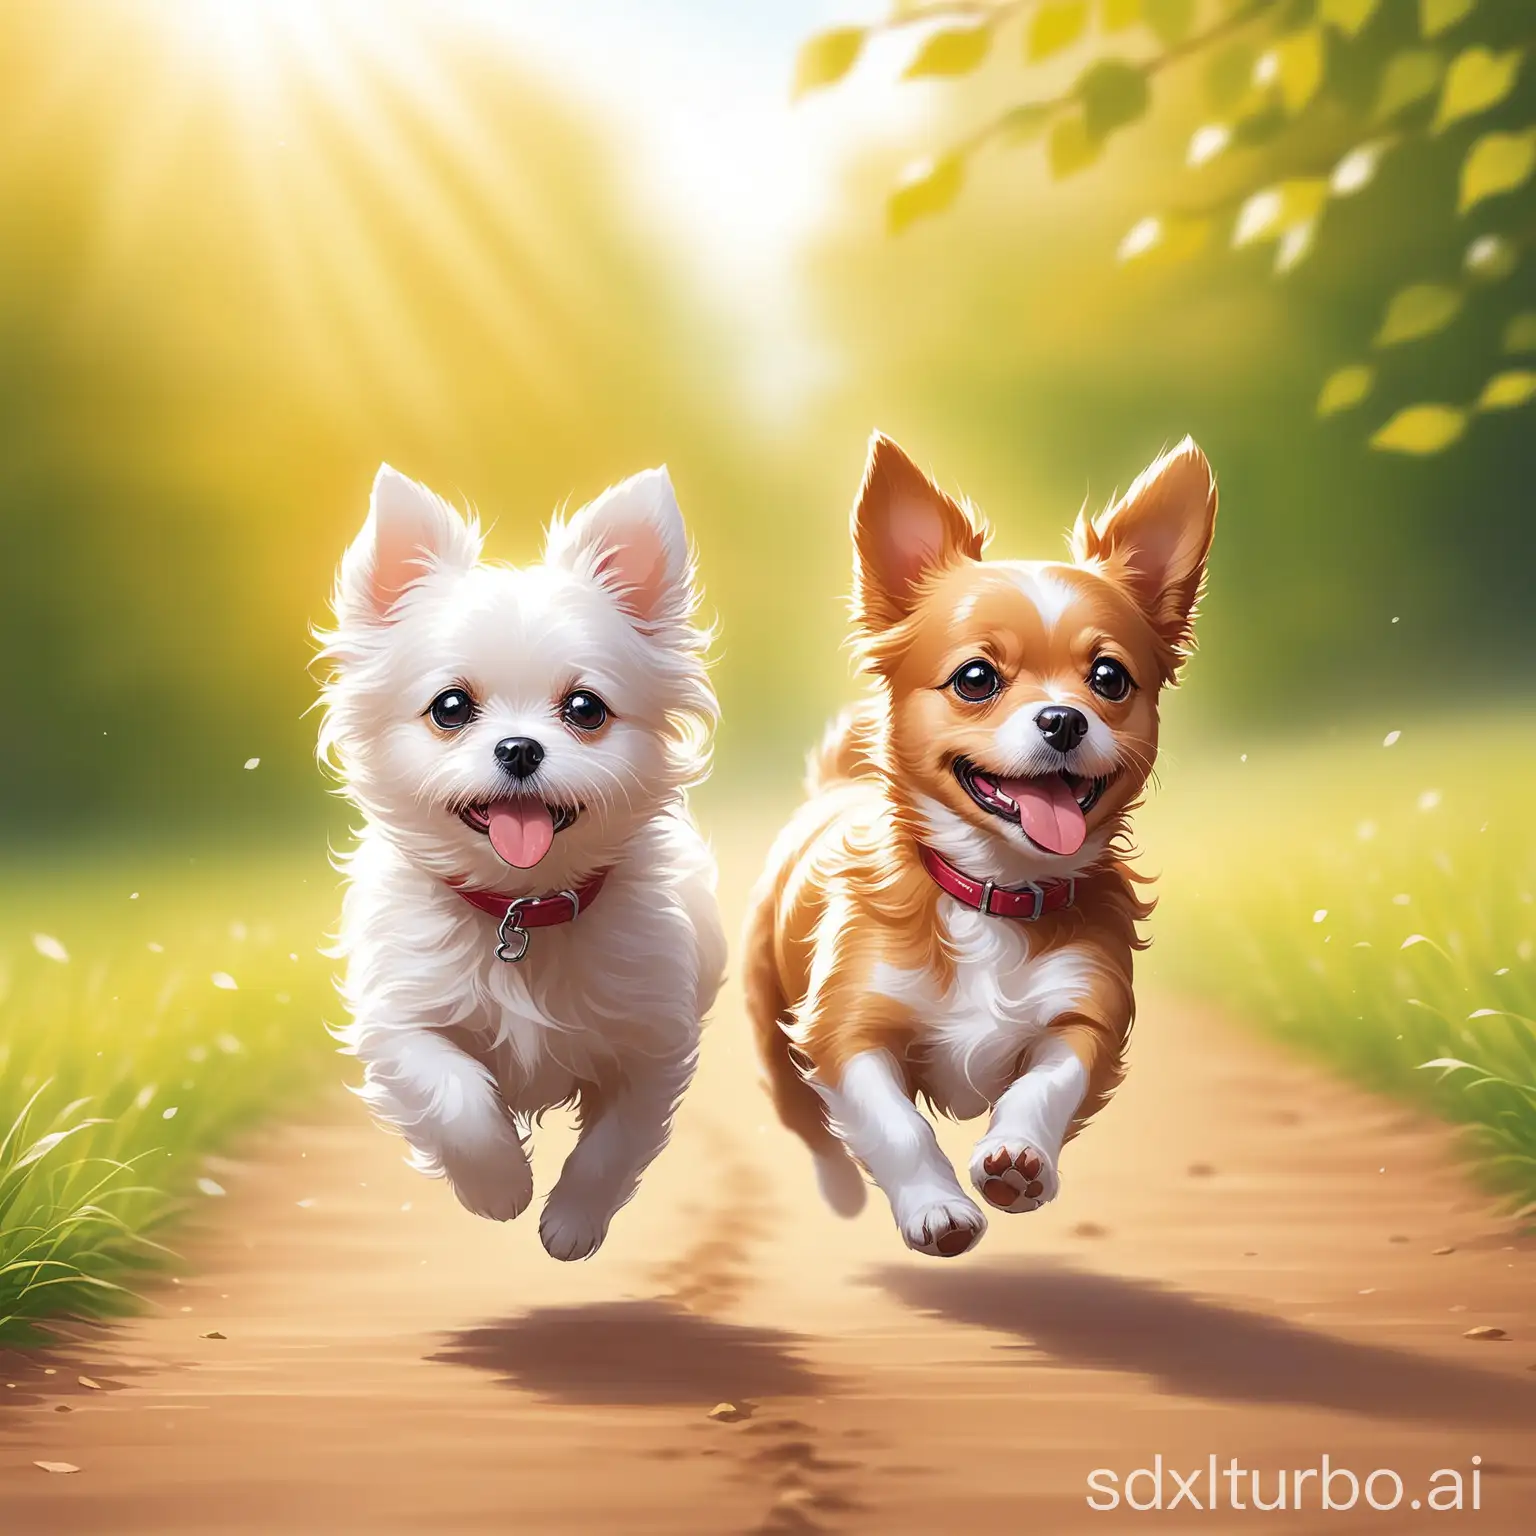 Two little dogs come running